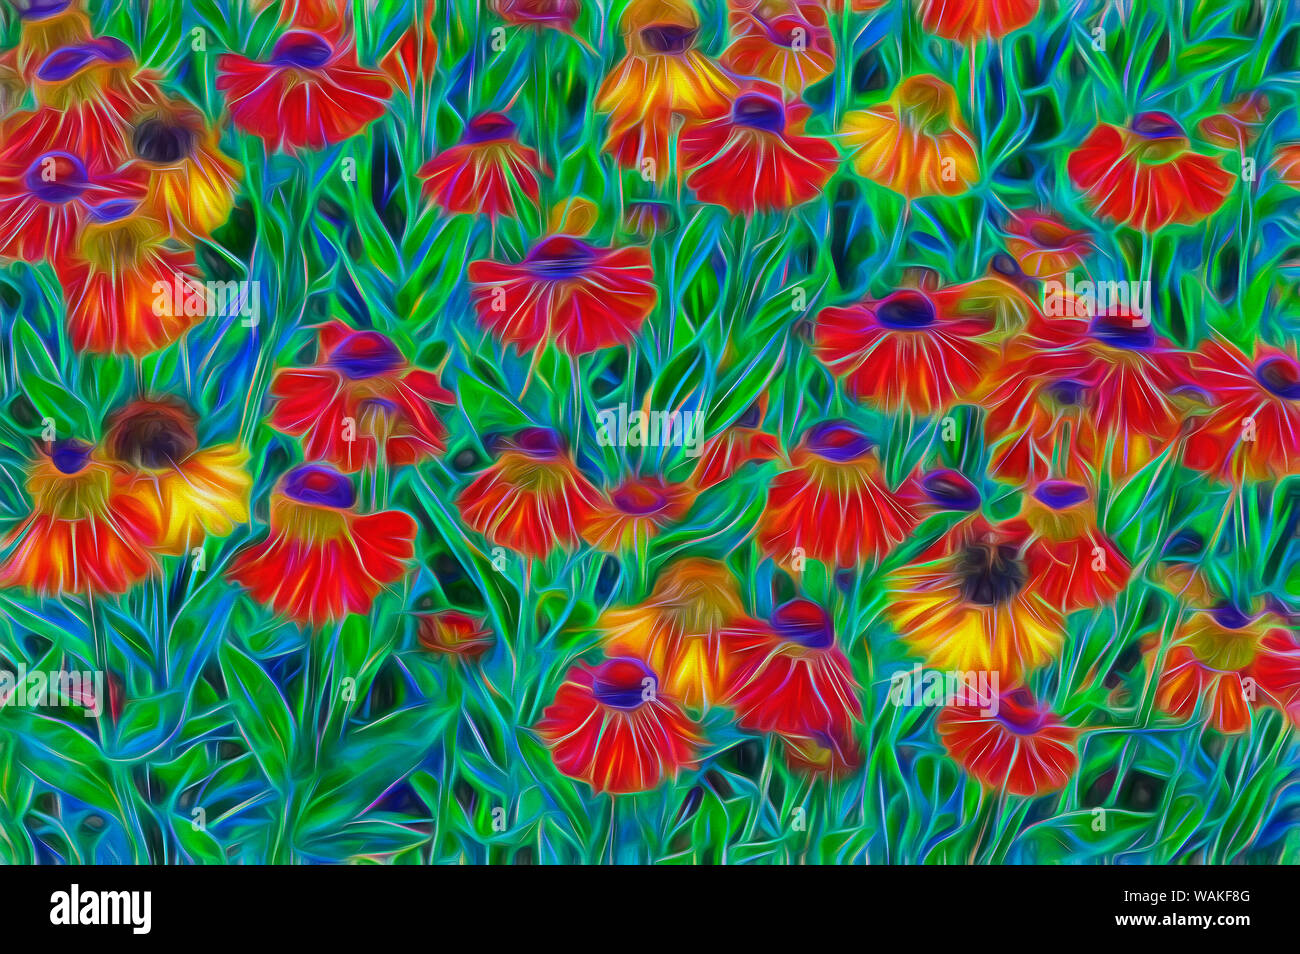 USA, Oregon, Coos Bay. Abstract of Helenium flowers in garden. Credit as: Jean Carter / Jaynes Gallery / DanitaDelimont.com Stock Photo